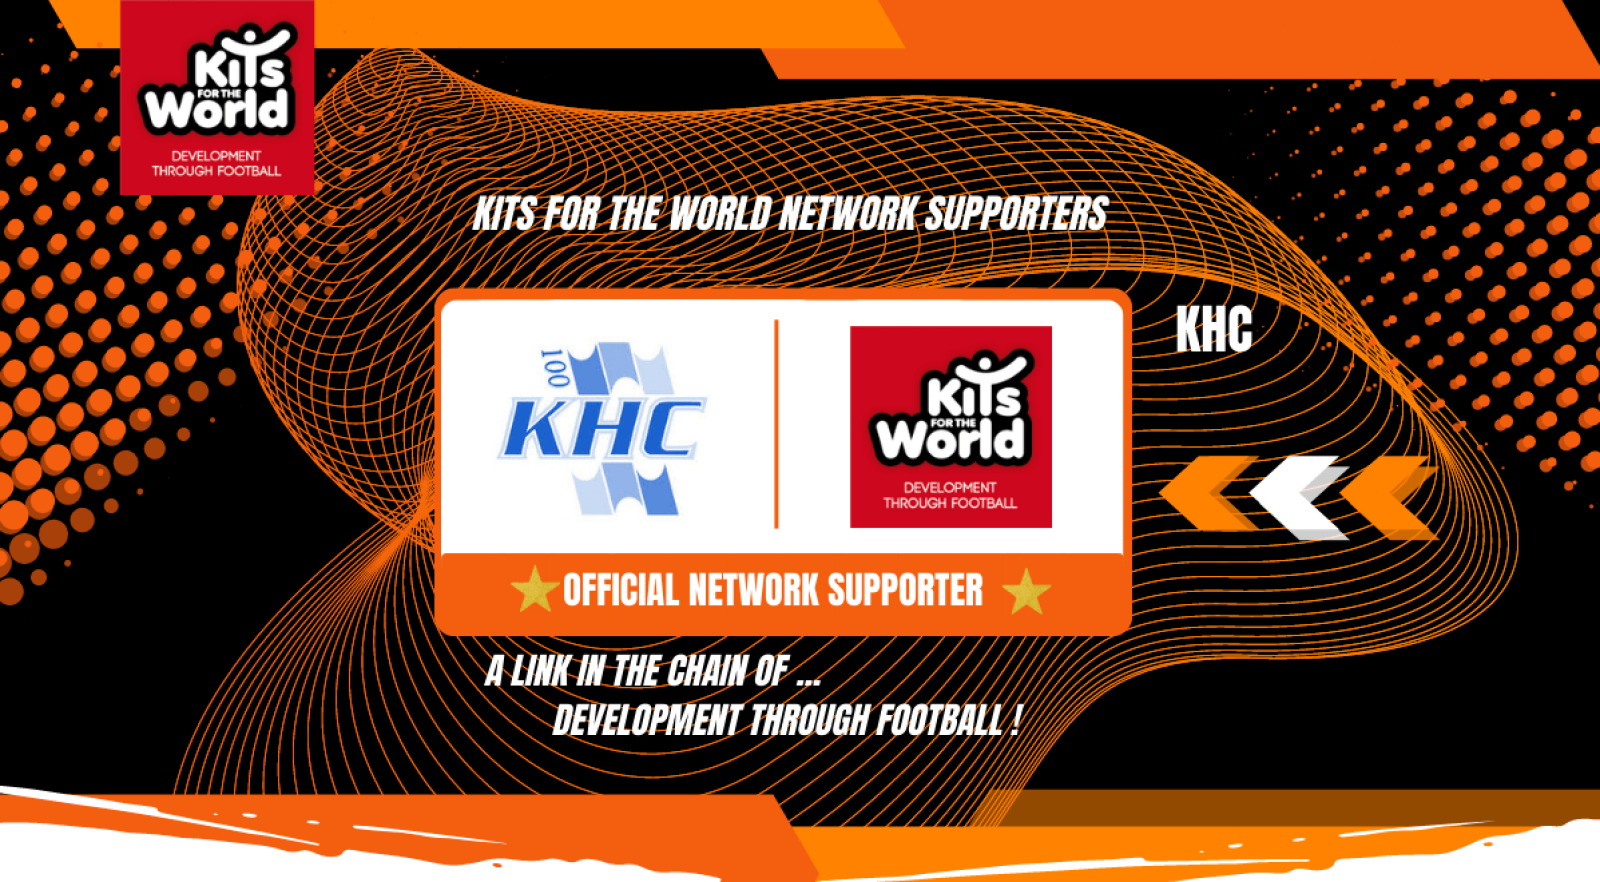 KHC _official NETWORK SUPPORTER _Kits for the World